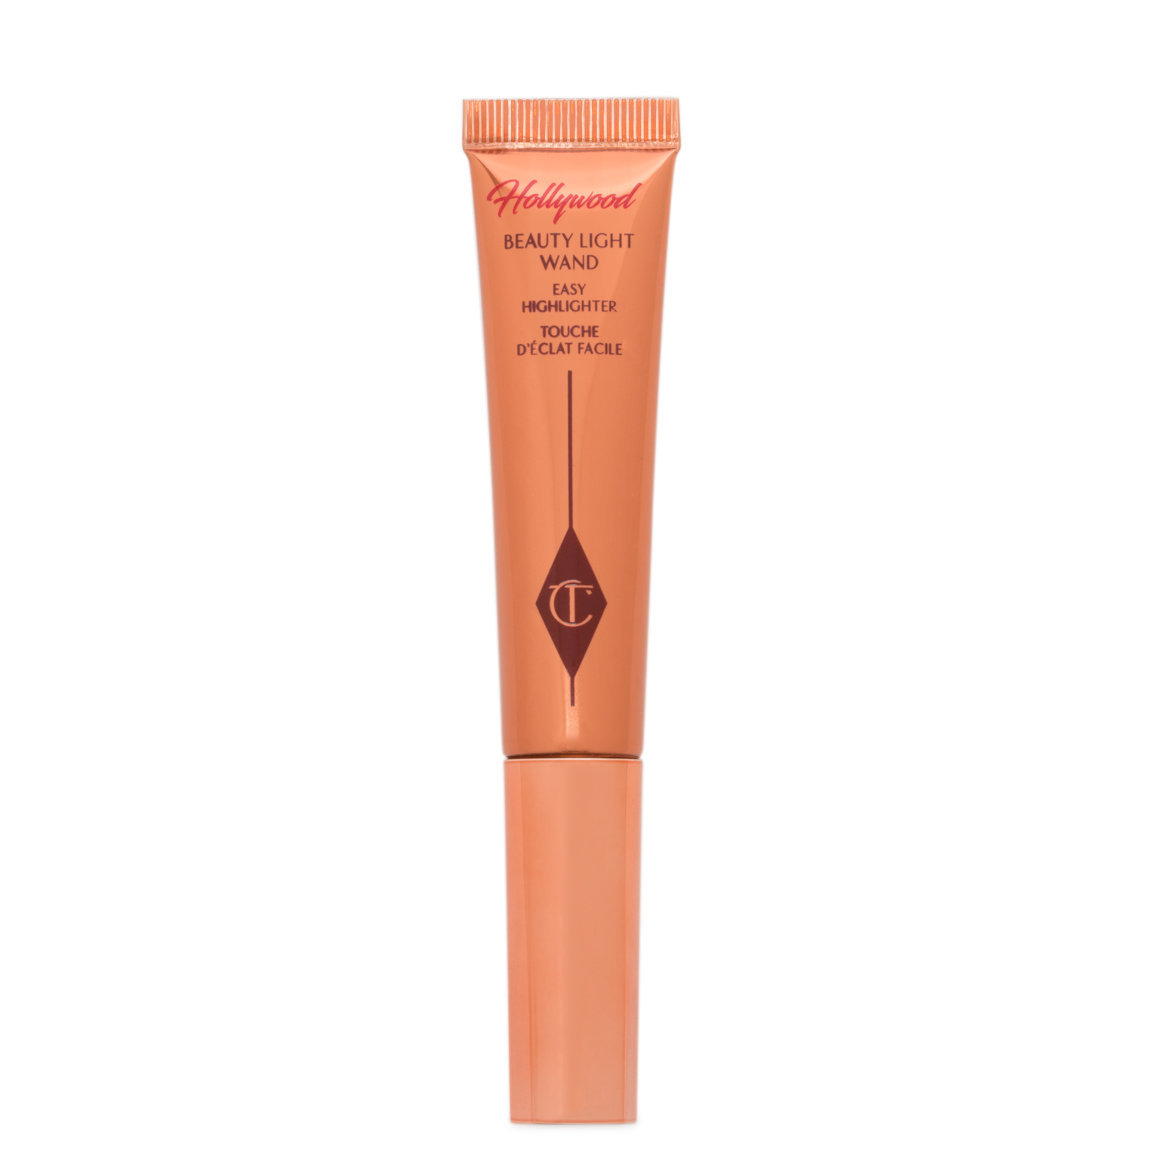 Charlotte Tilbury Hollywood Beauty Light Wand alternative view 1 - product swatch.